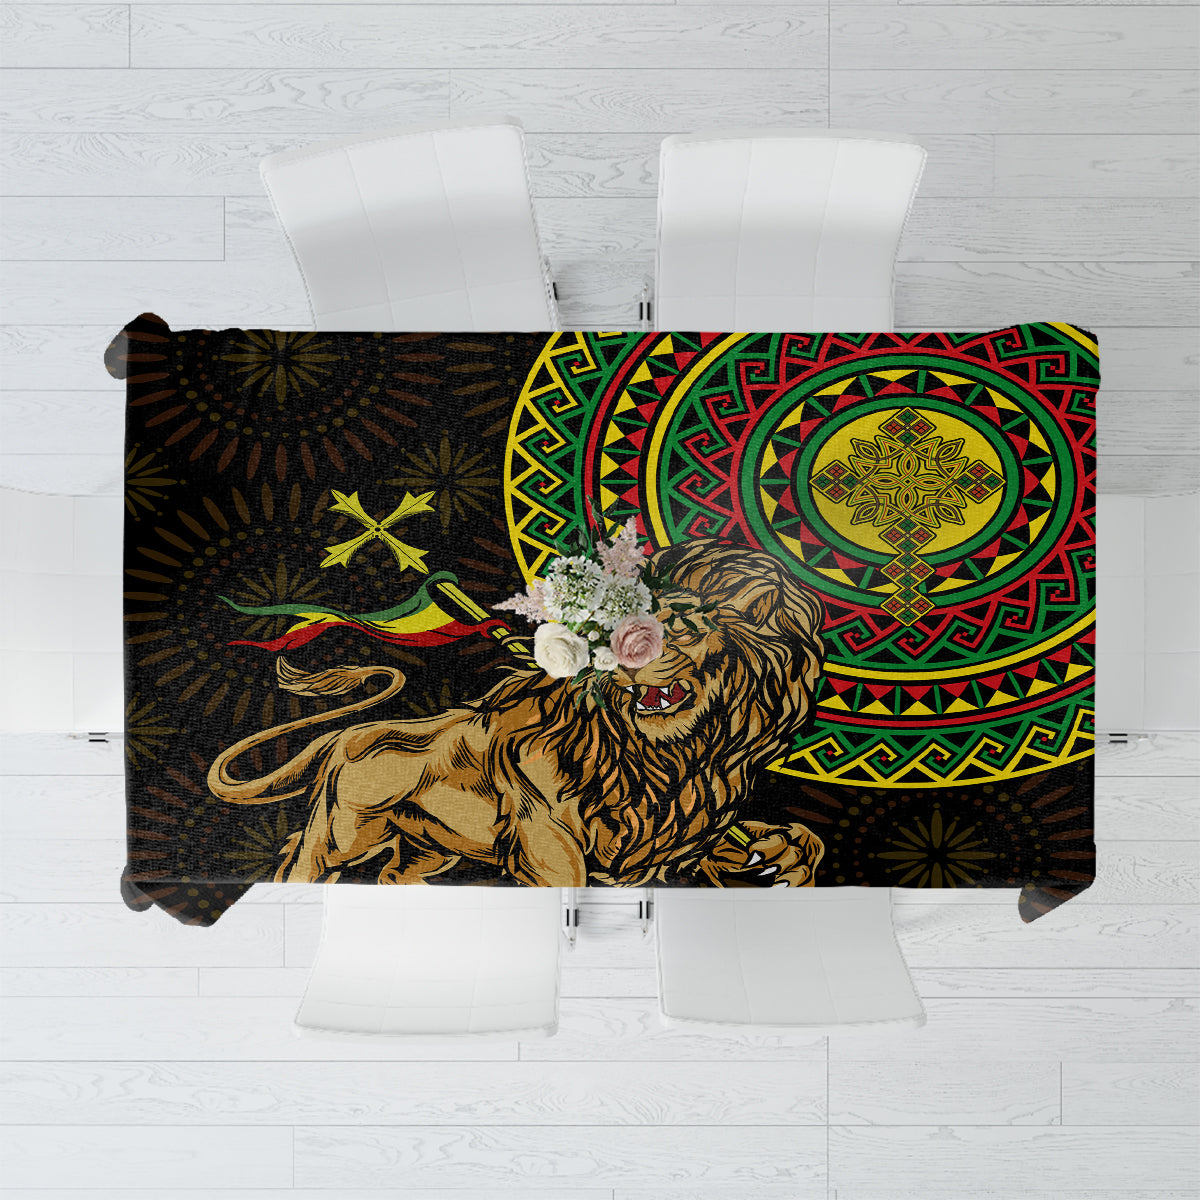 Ethiopia National Day Tablecloth Lion Of Judah African Pattern